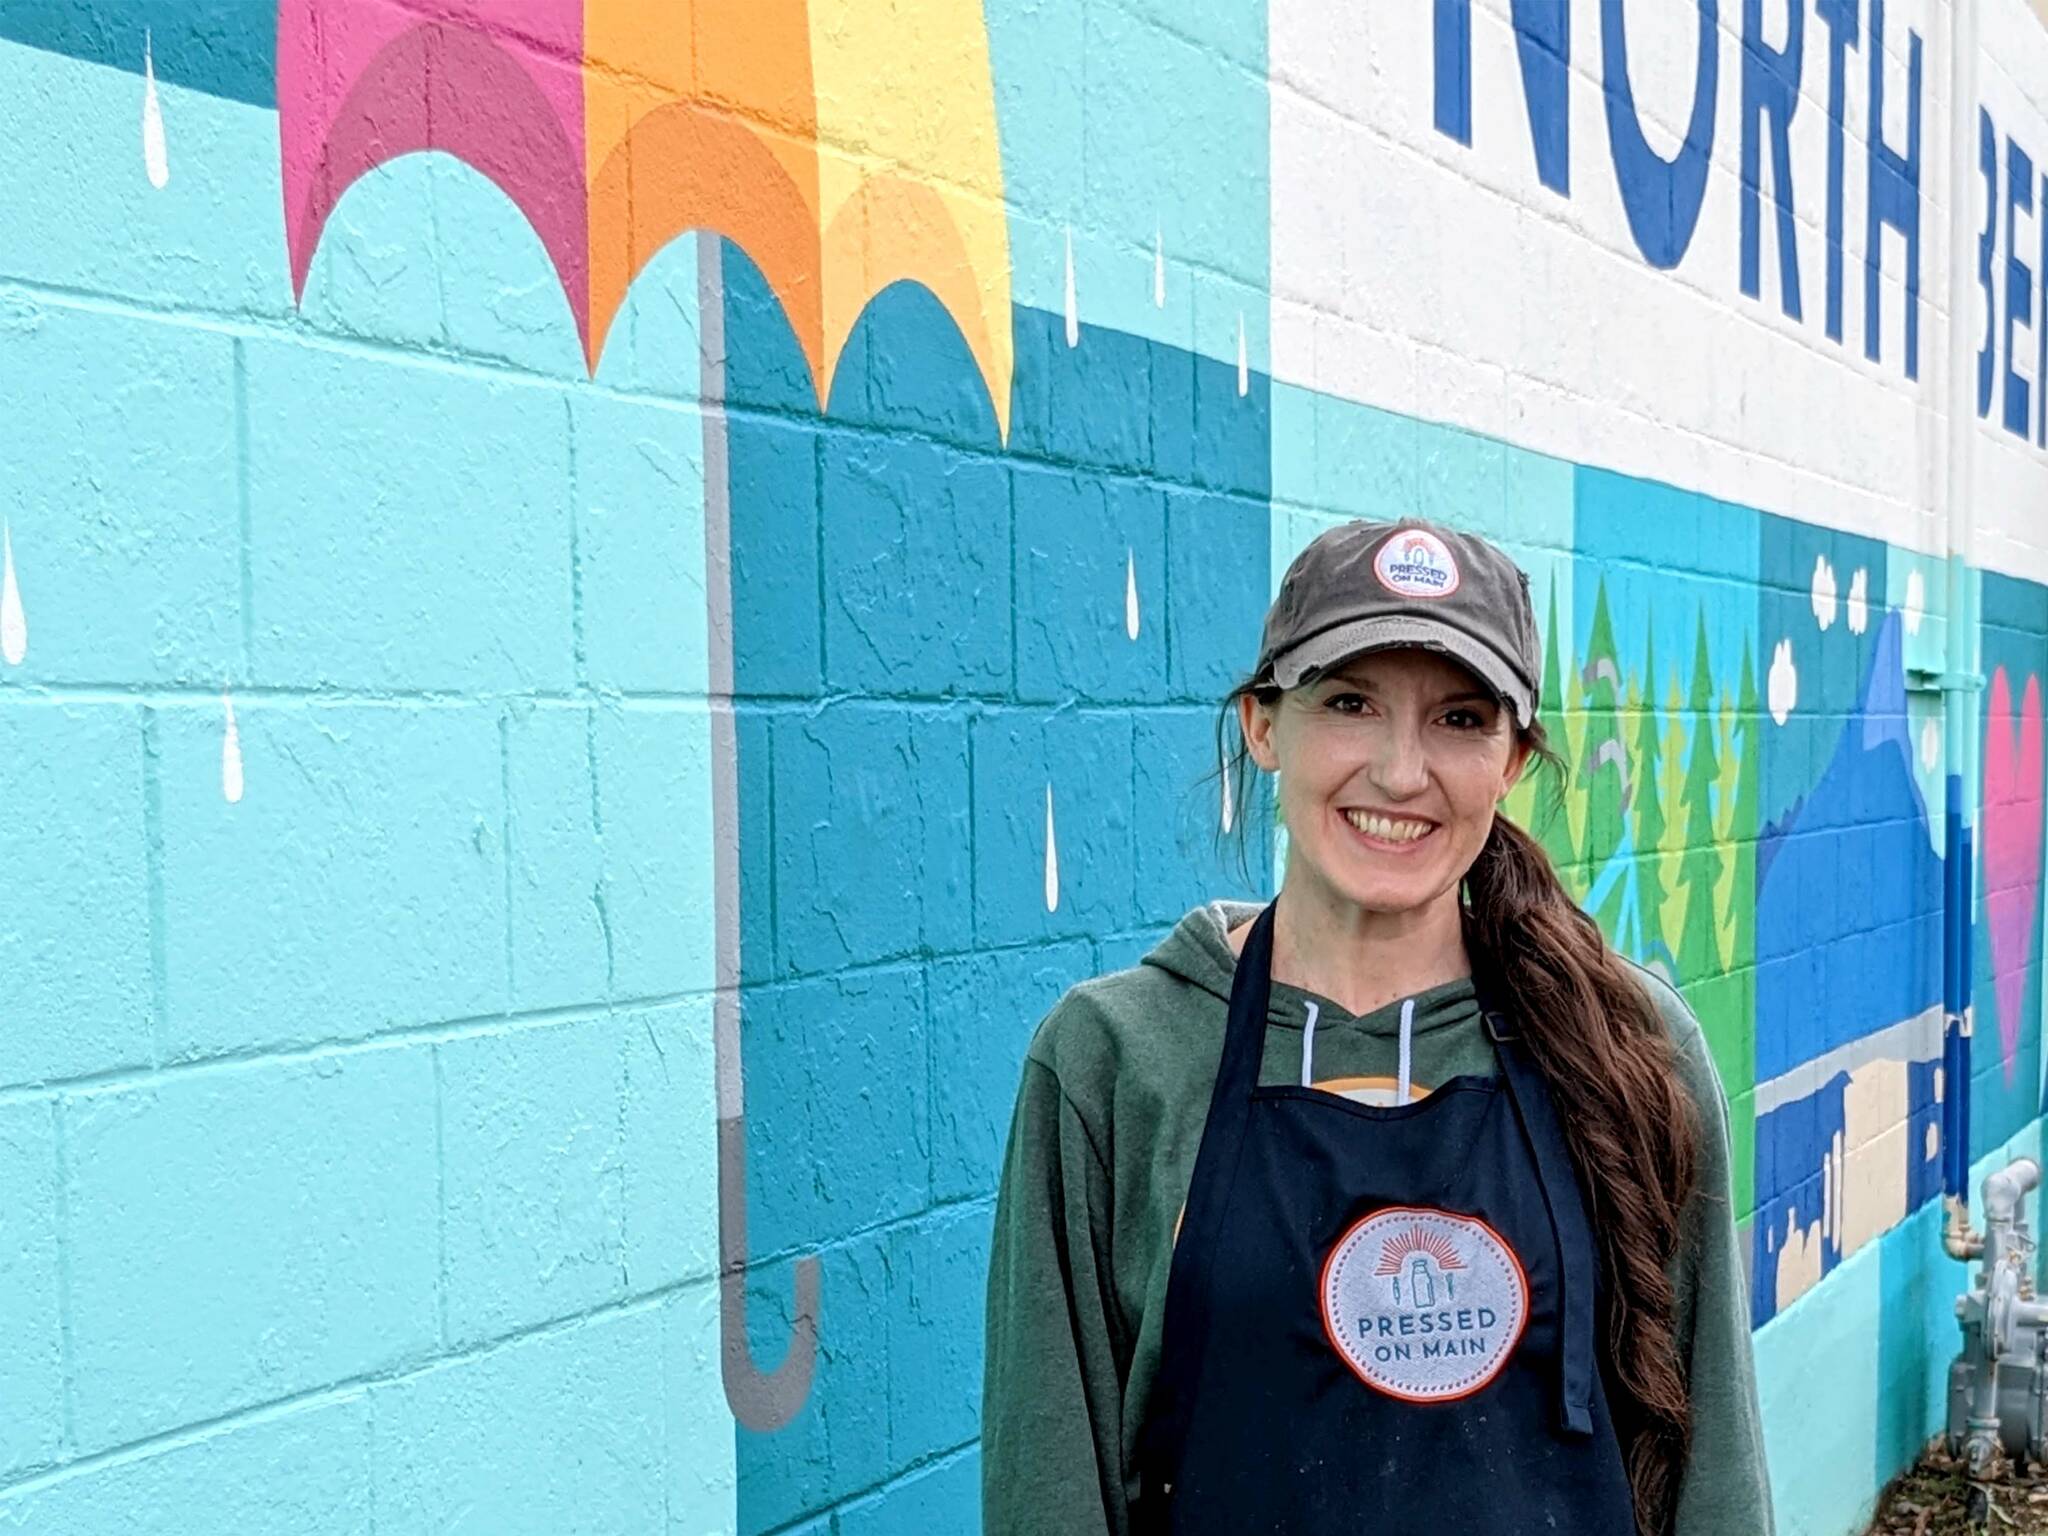 Photo by Conor Wilson/Valley Record.
Hayley Raff, owner of Pressed on Main, poses in front of a mural on the side of her business at 208 Main Ave. S., North Bend.